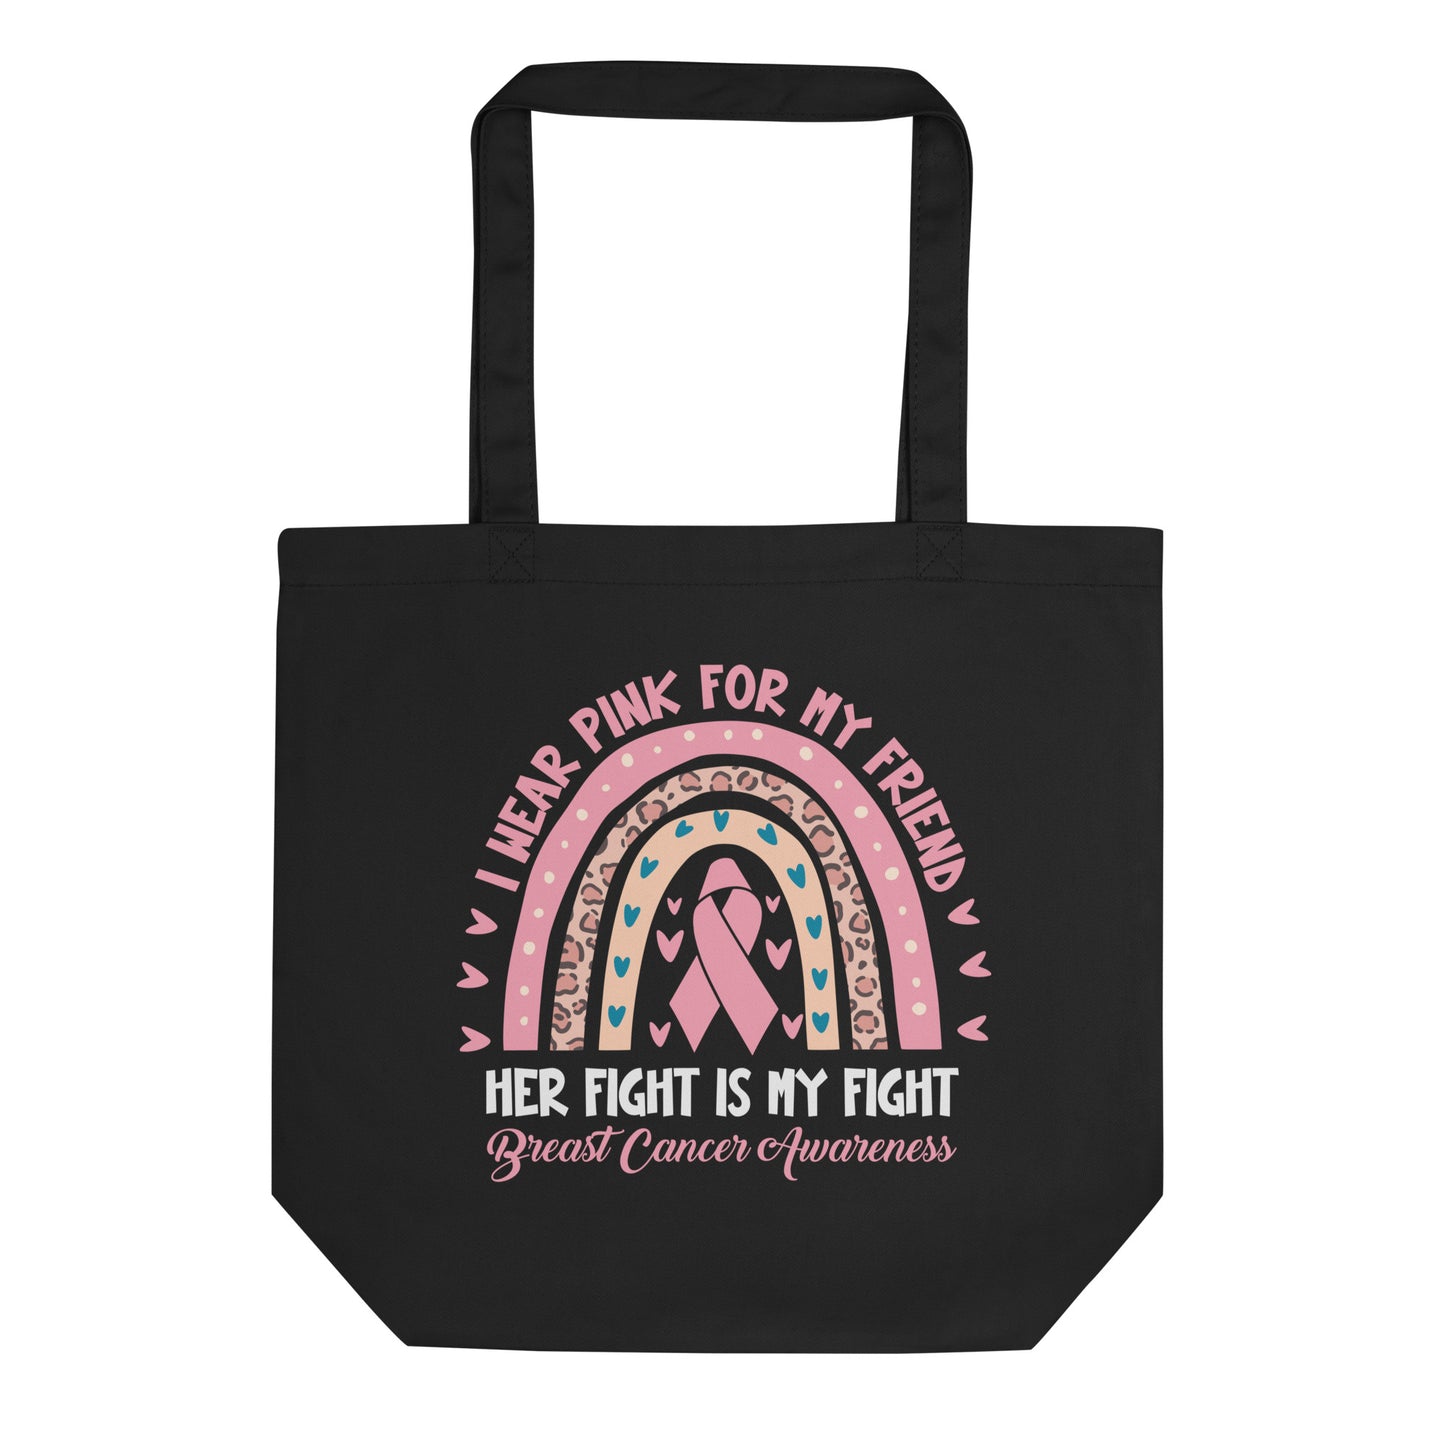 I Wear Pink for My Friend Eco Tote Bag